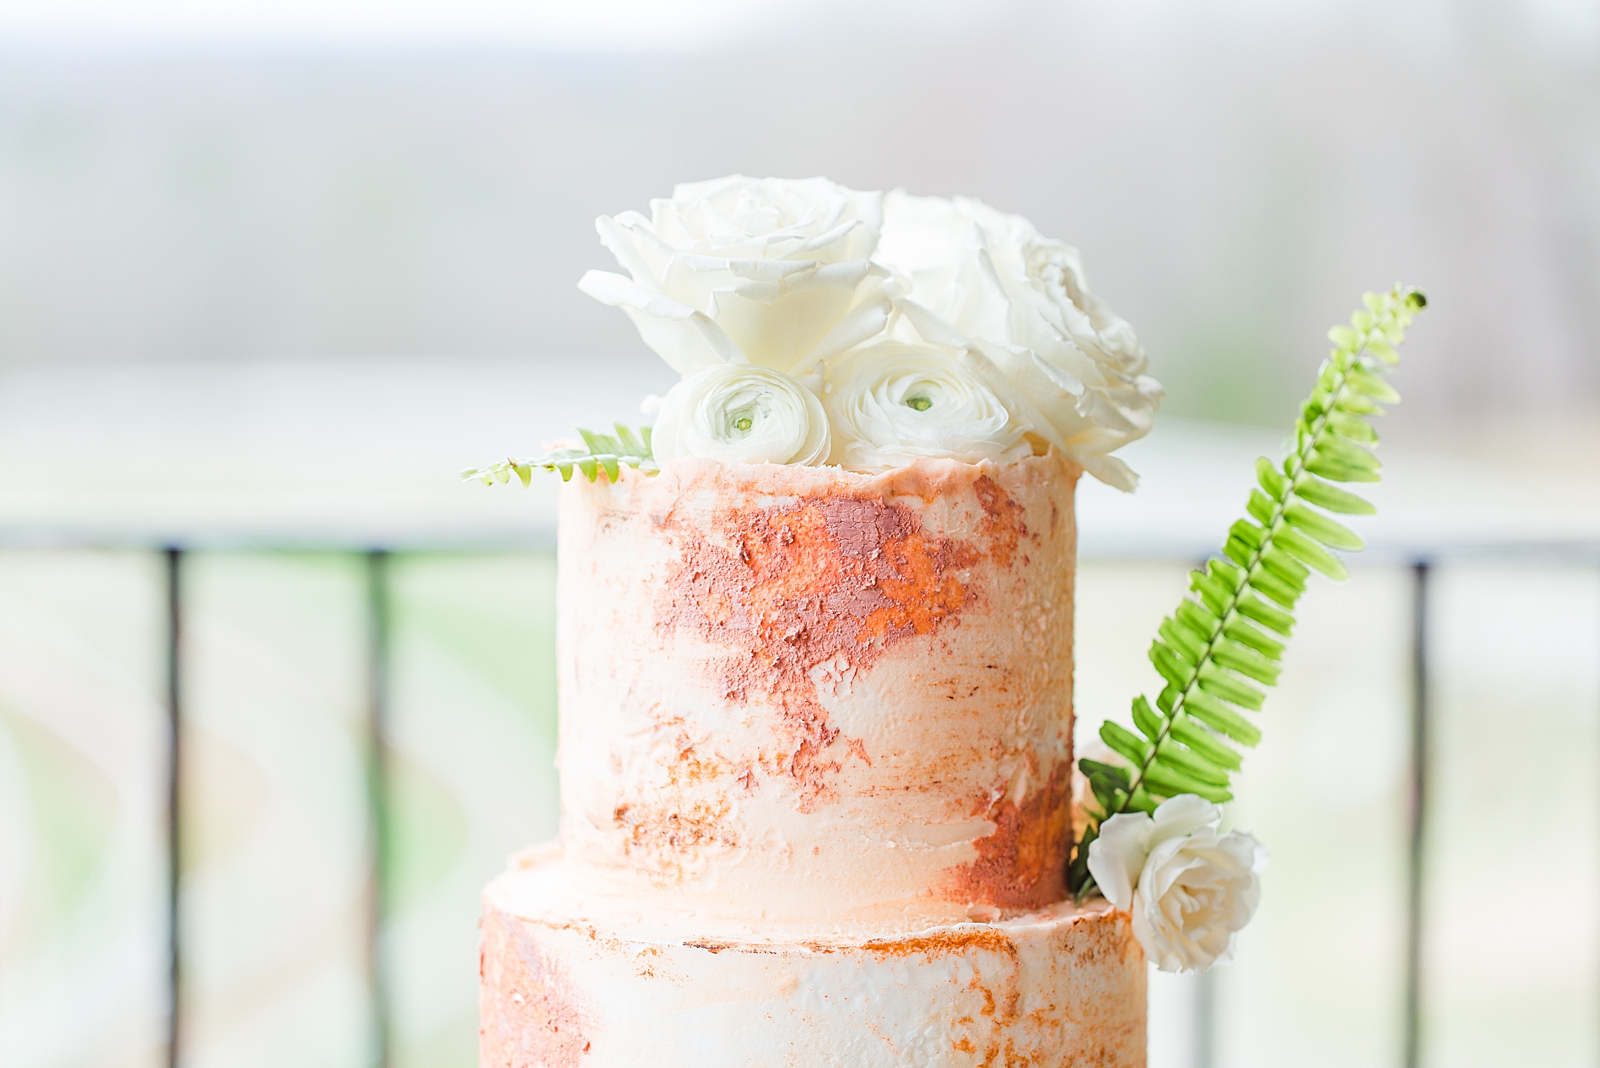 Montaluce Winery Wedding Reception Rustic Texture Cake with White Flowers Photo